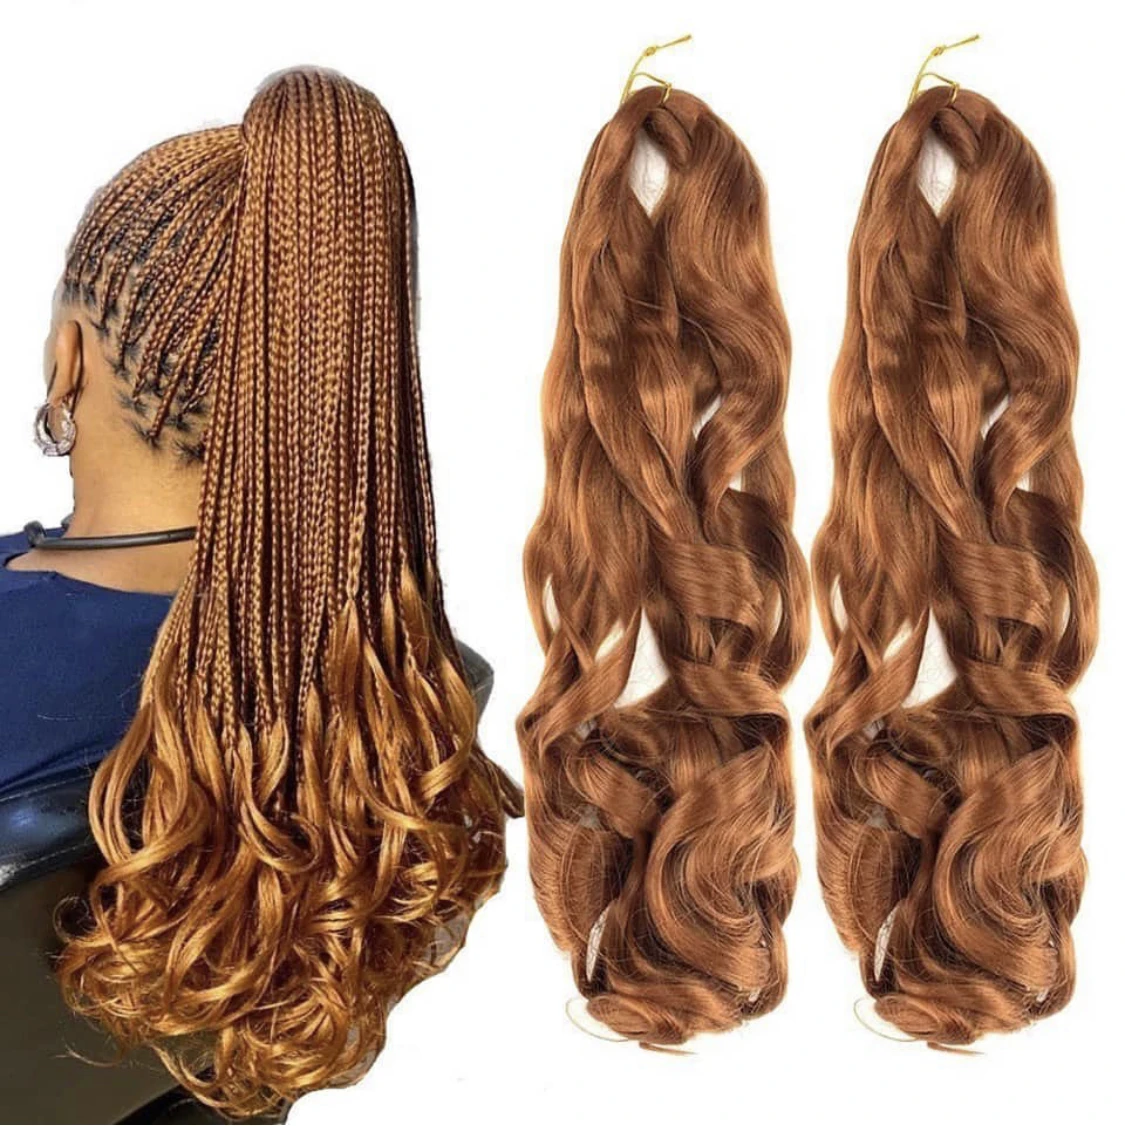 

synthetic hair loose wave curly crochet braiding hair wavy extension 22inch 150g Curly attachments hair braids Spiral Curl wavy, Pic showed